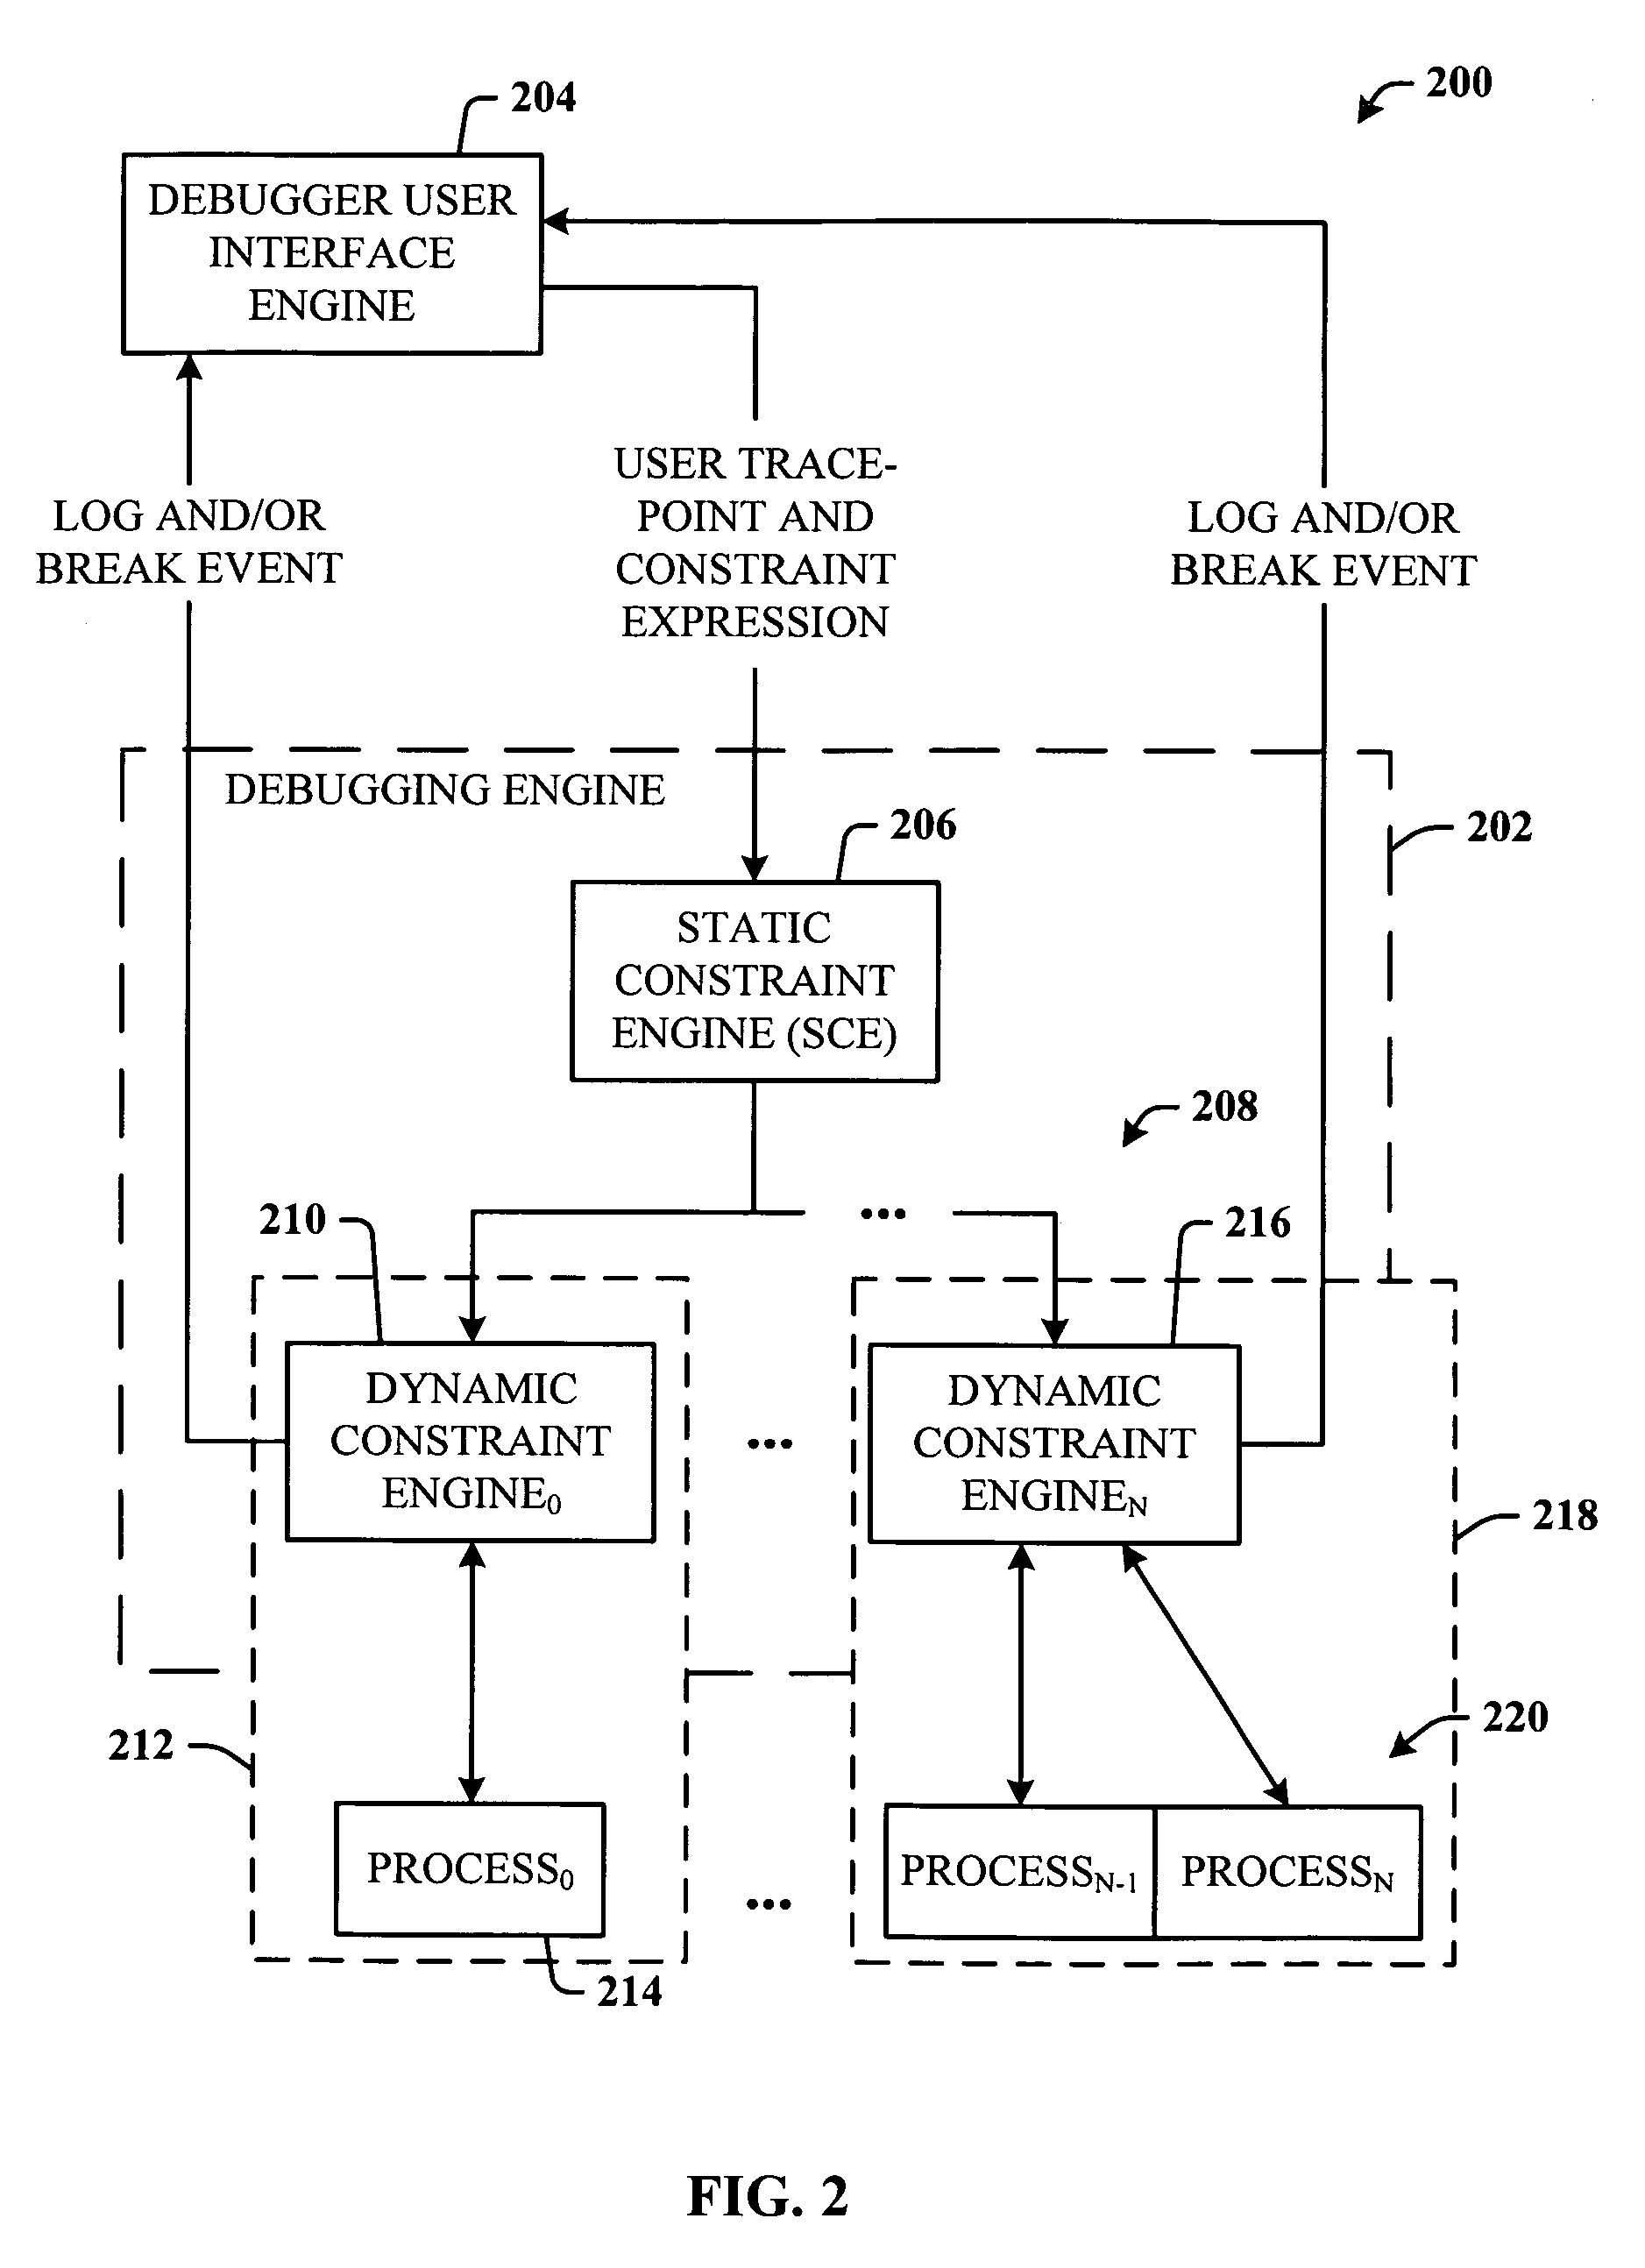 Breakpoint logging and constraint mechanisms for parallel computing systems